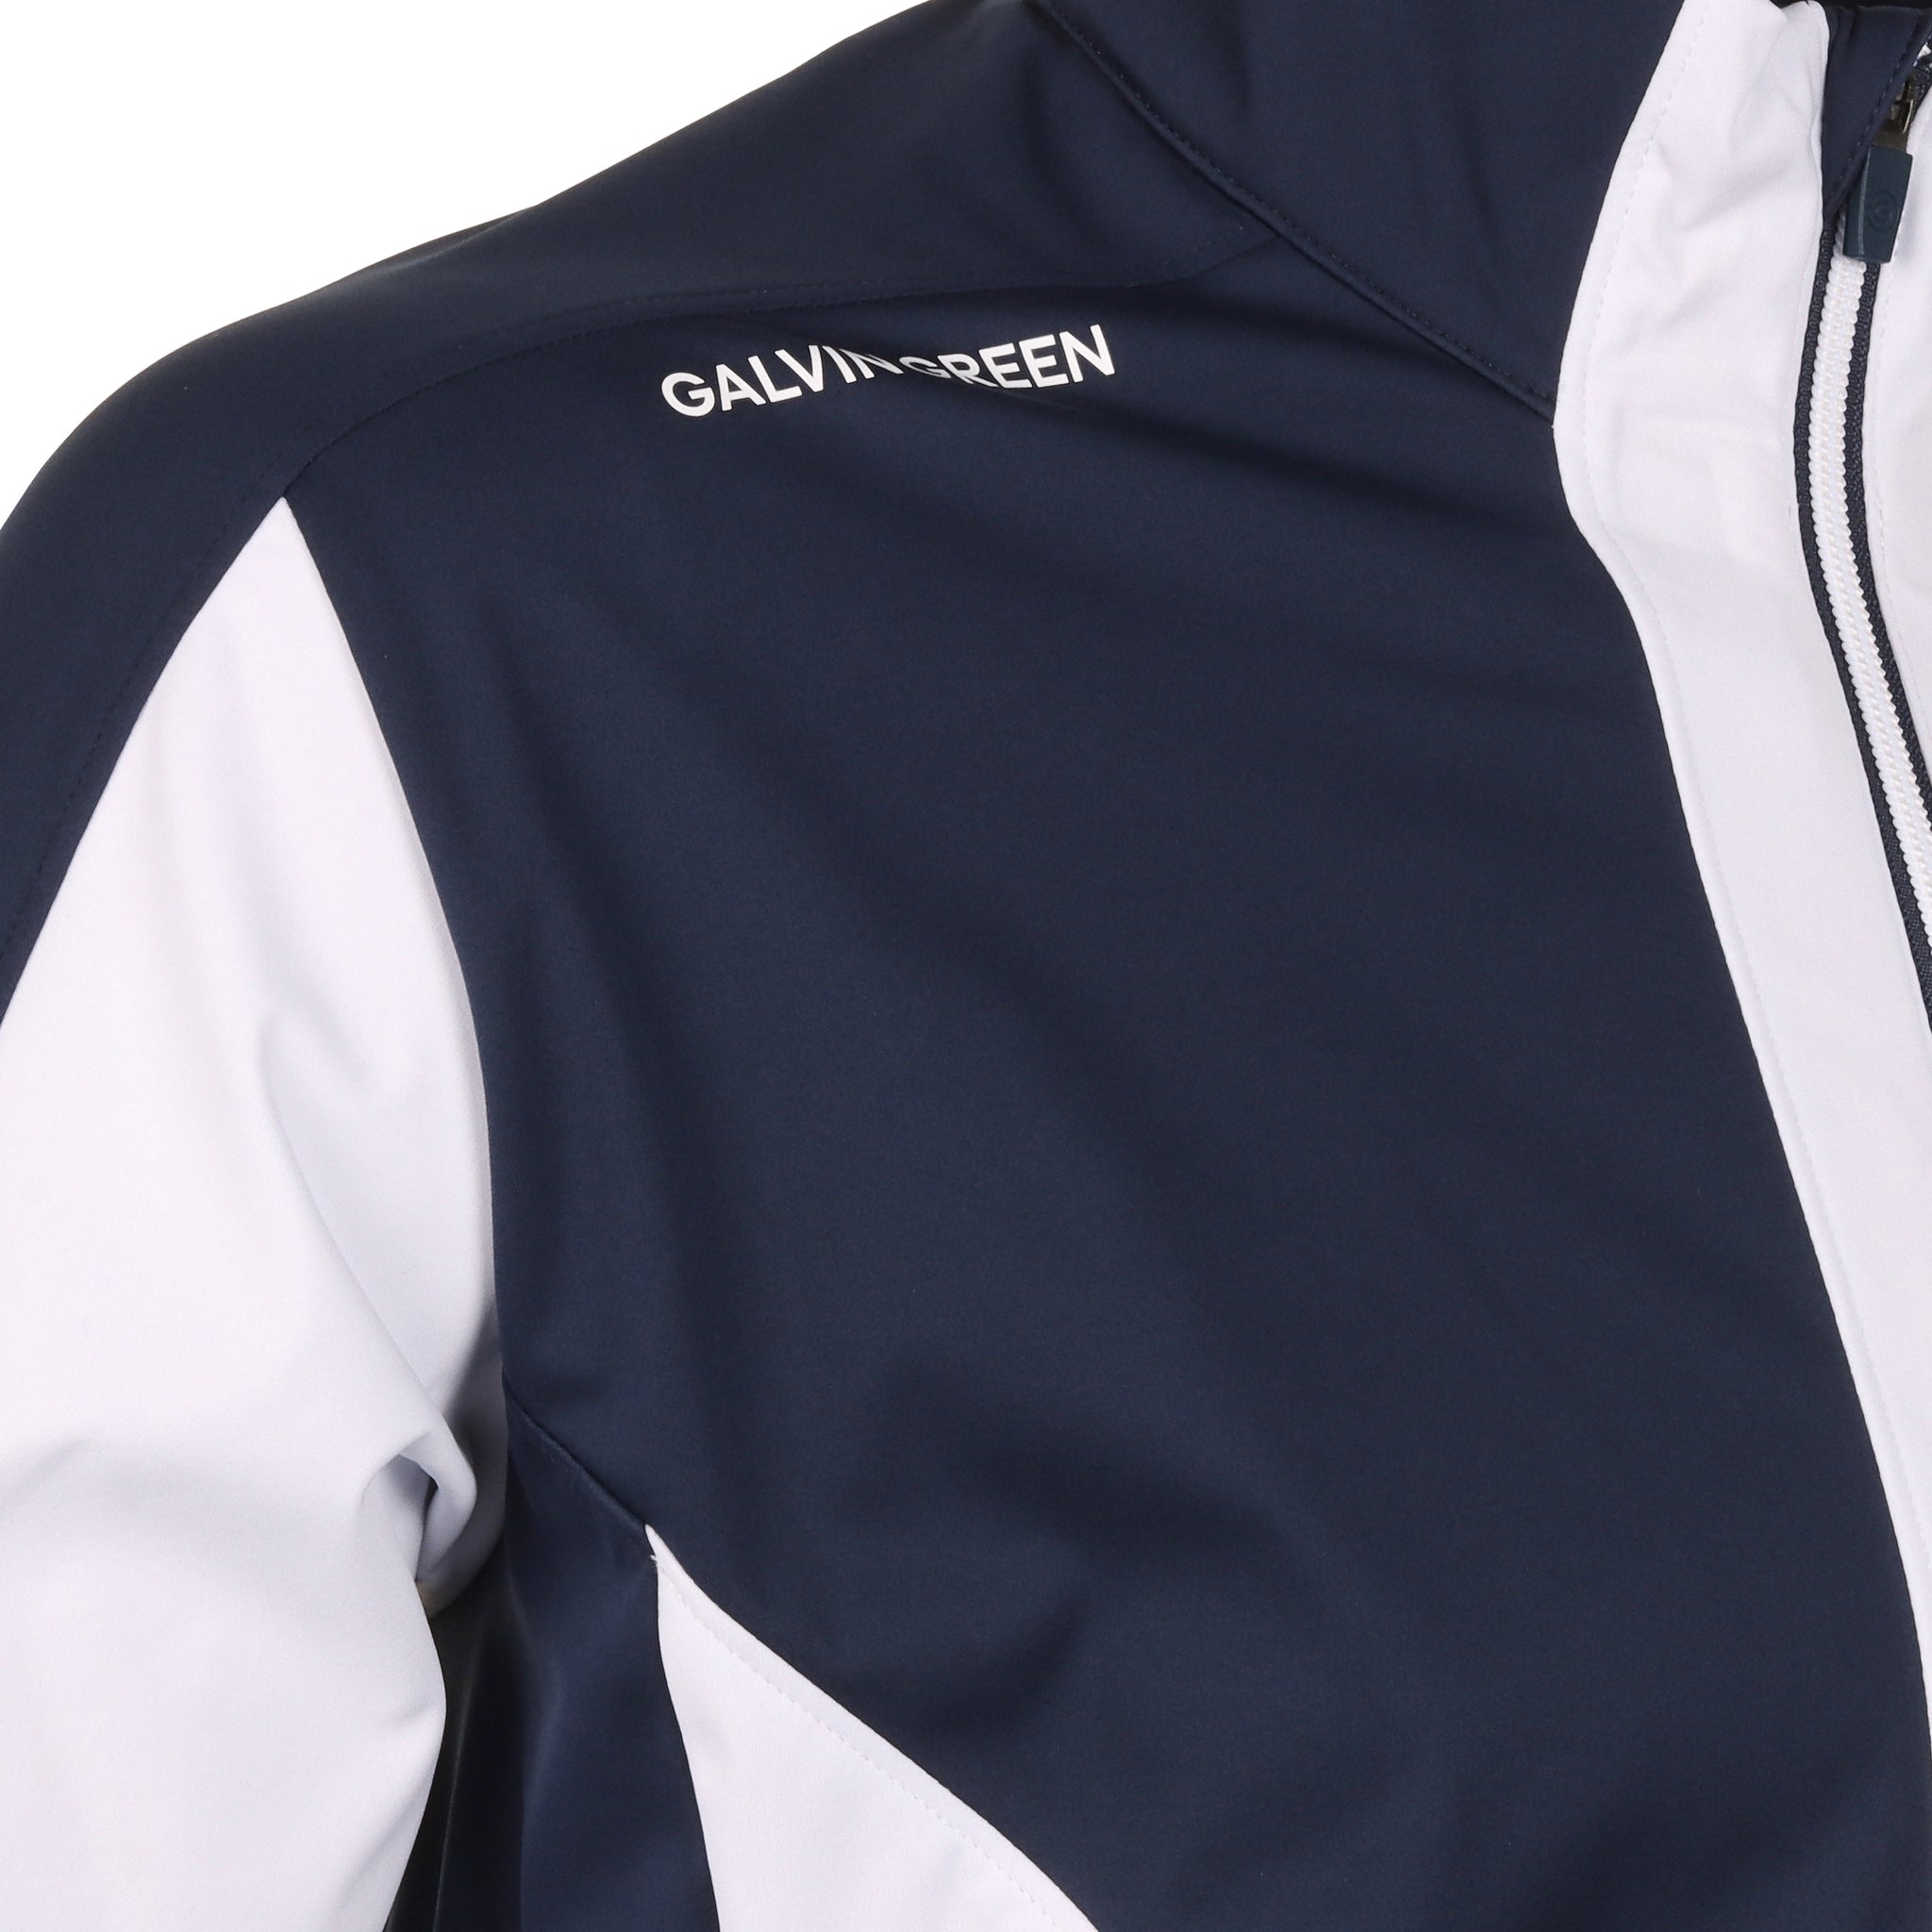 galvin-green-lawrence-interface-1-golf-jacket-white-navy-9996